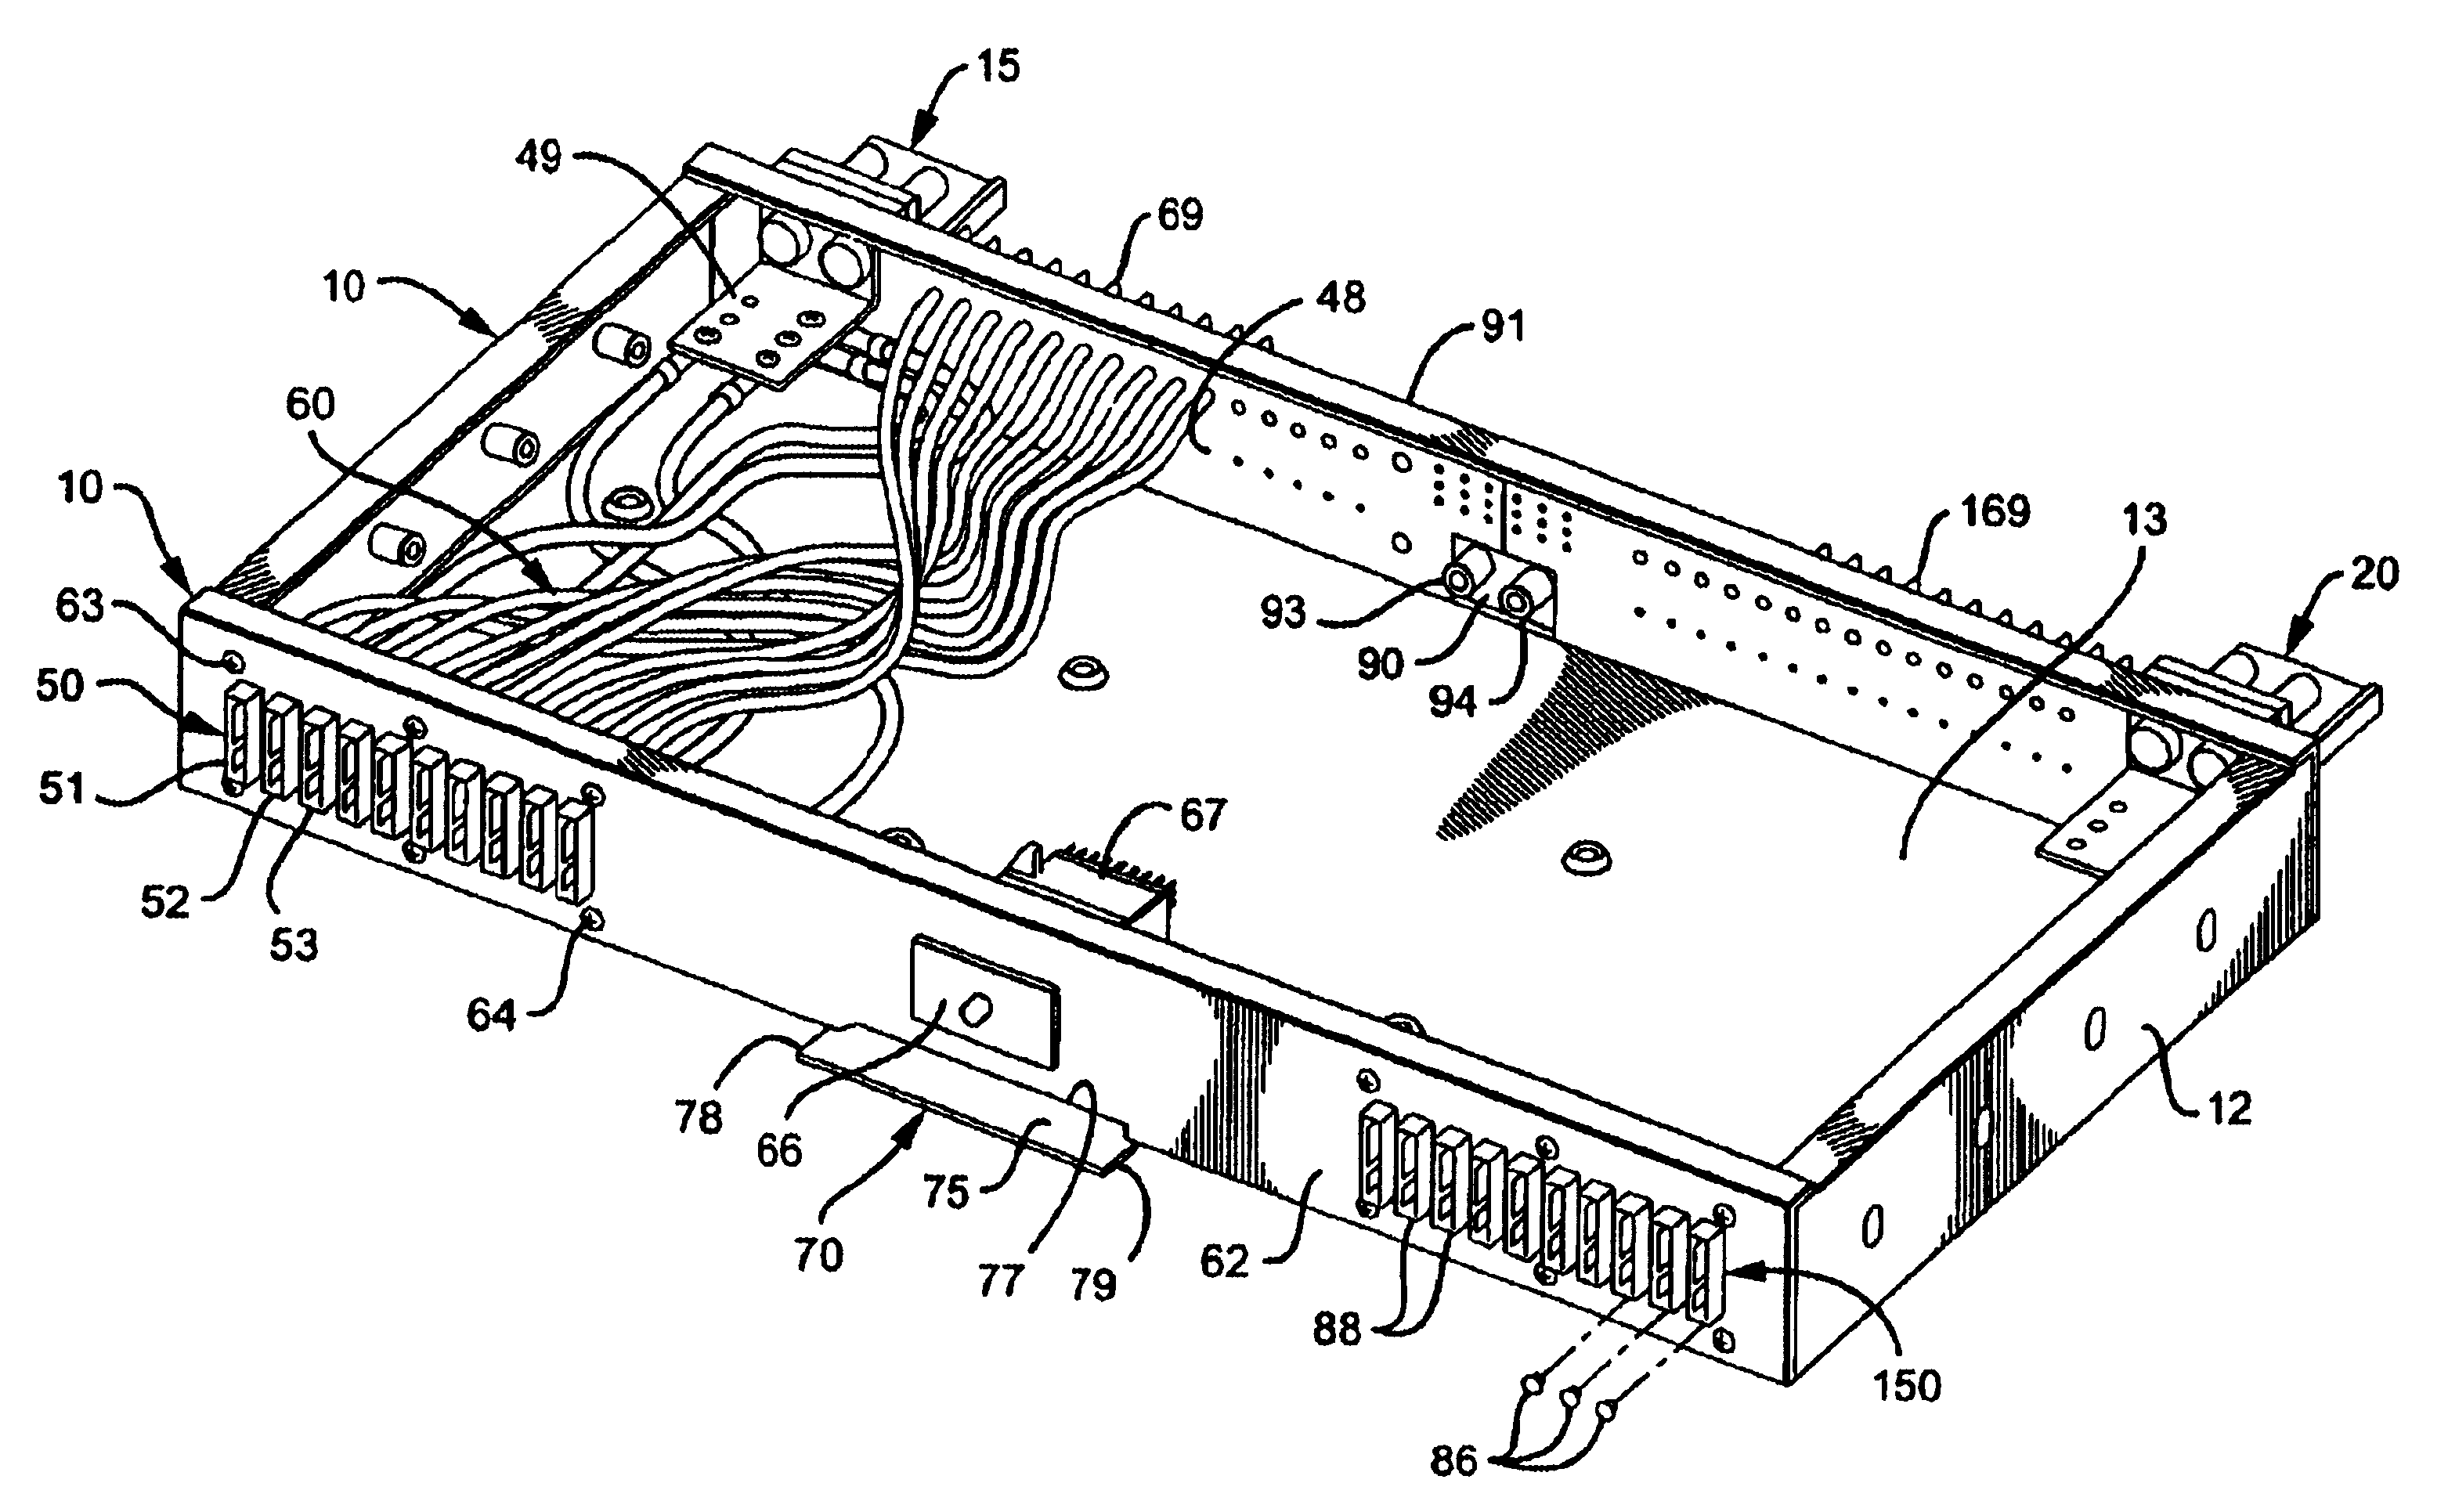 Electric apparatus with electric terminals and fused structures